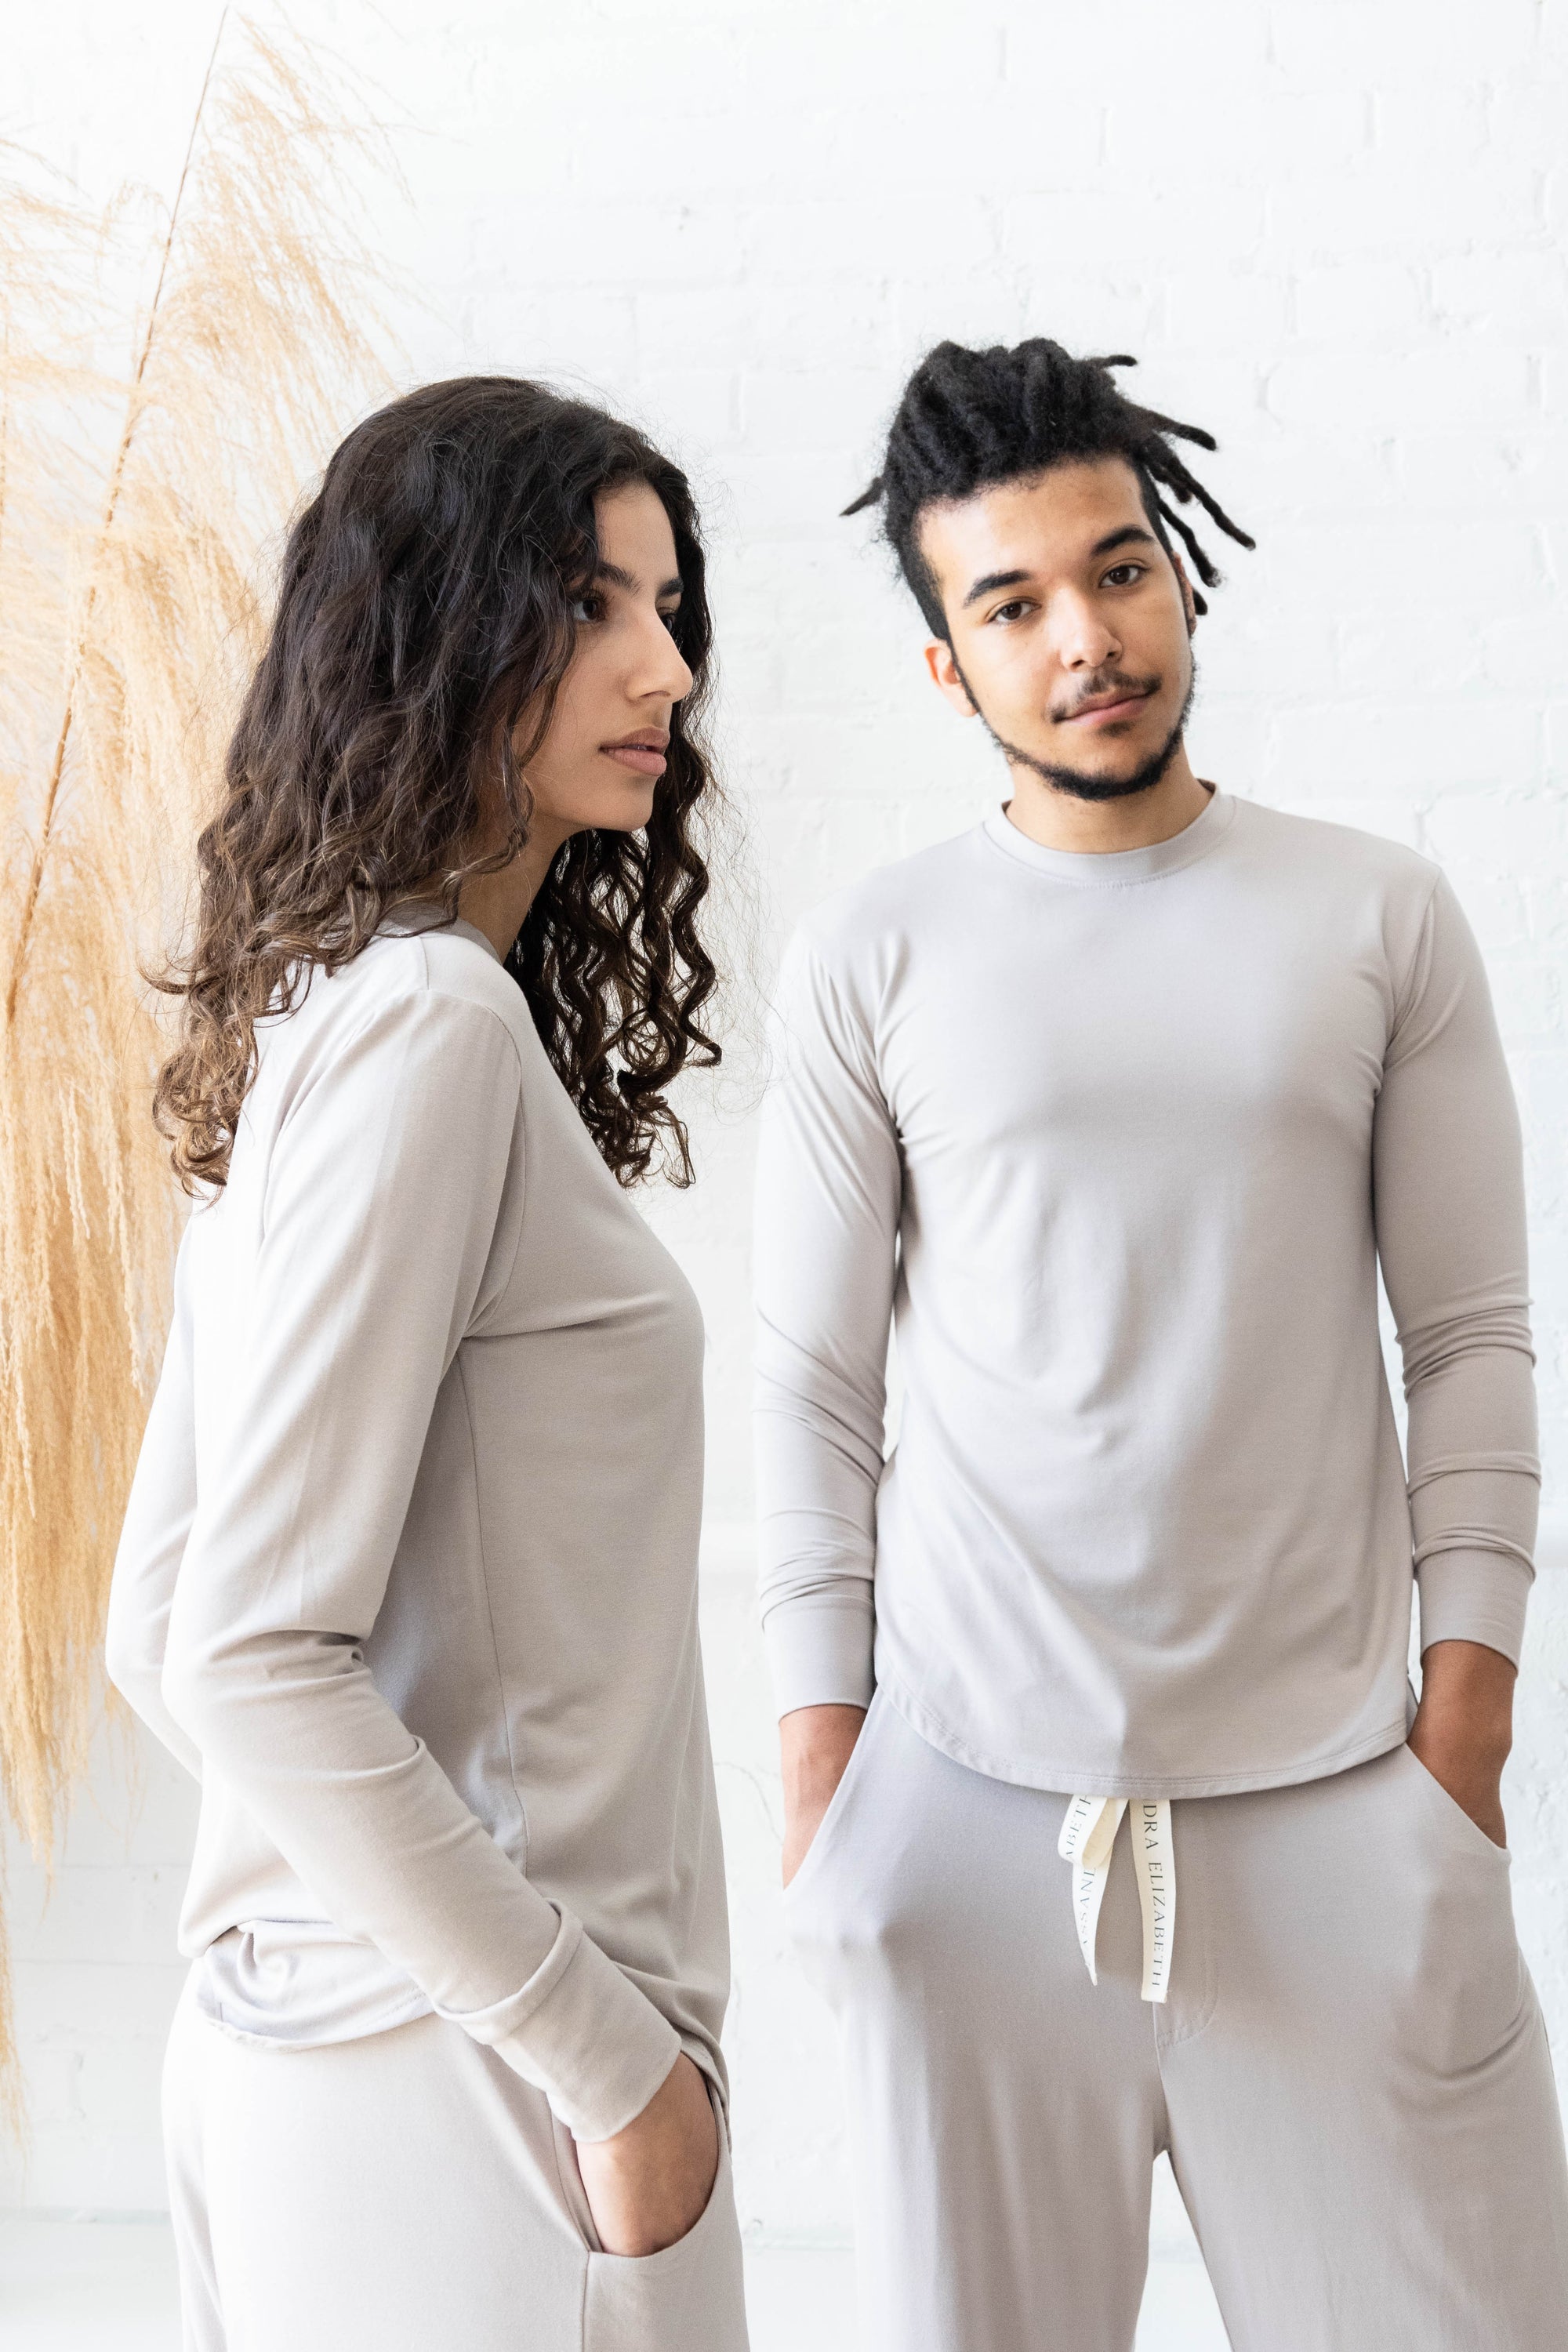 The Long Sleeve - Almond by Cassandra Elizabeth is an ethically made, minimalist wardrobe essential, and is the epitome of quiet luxury. 